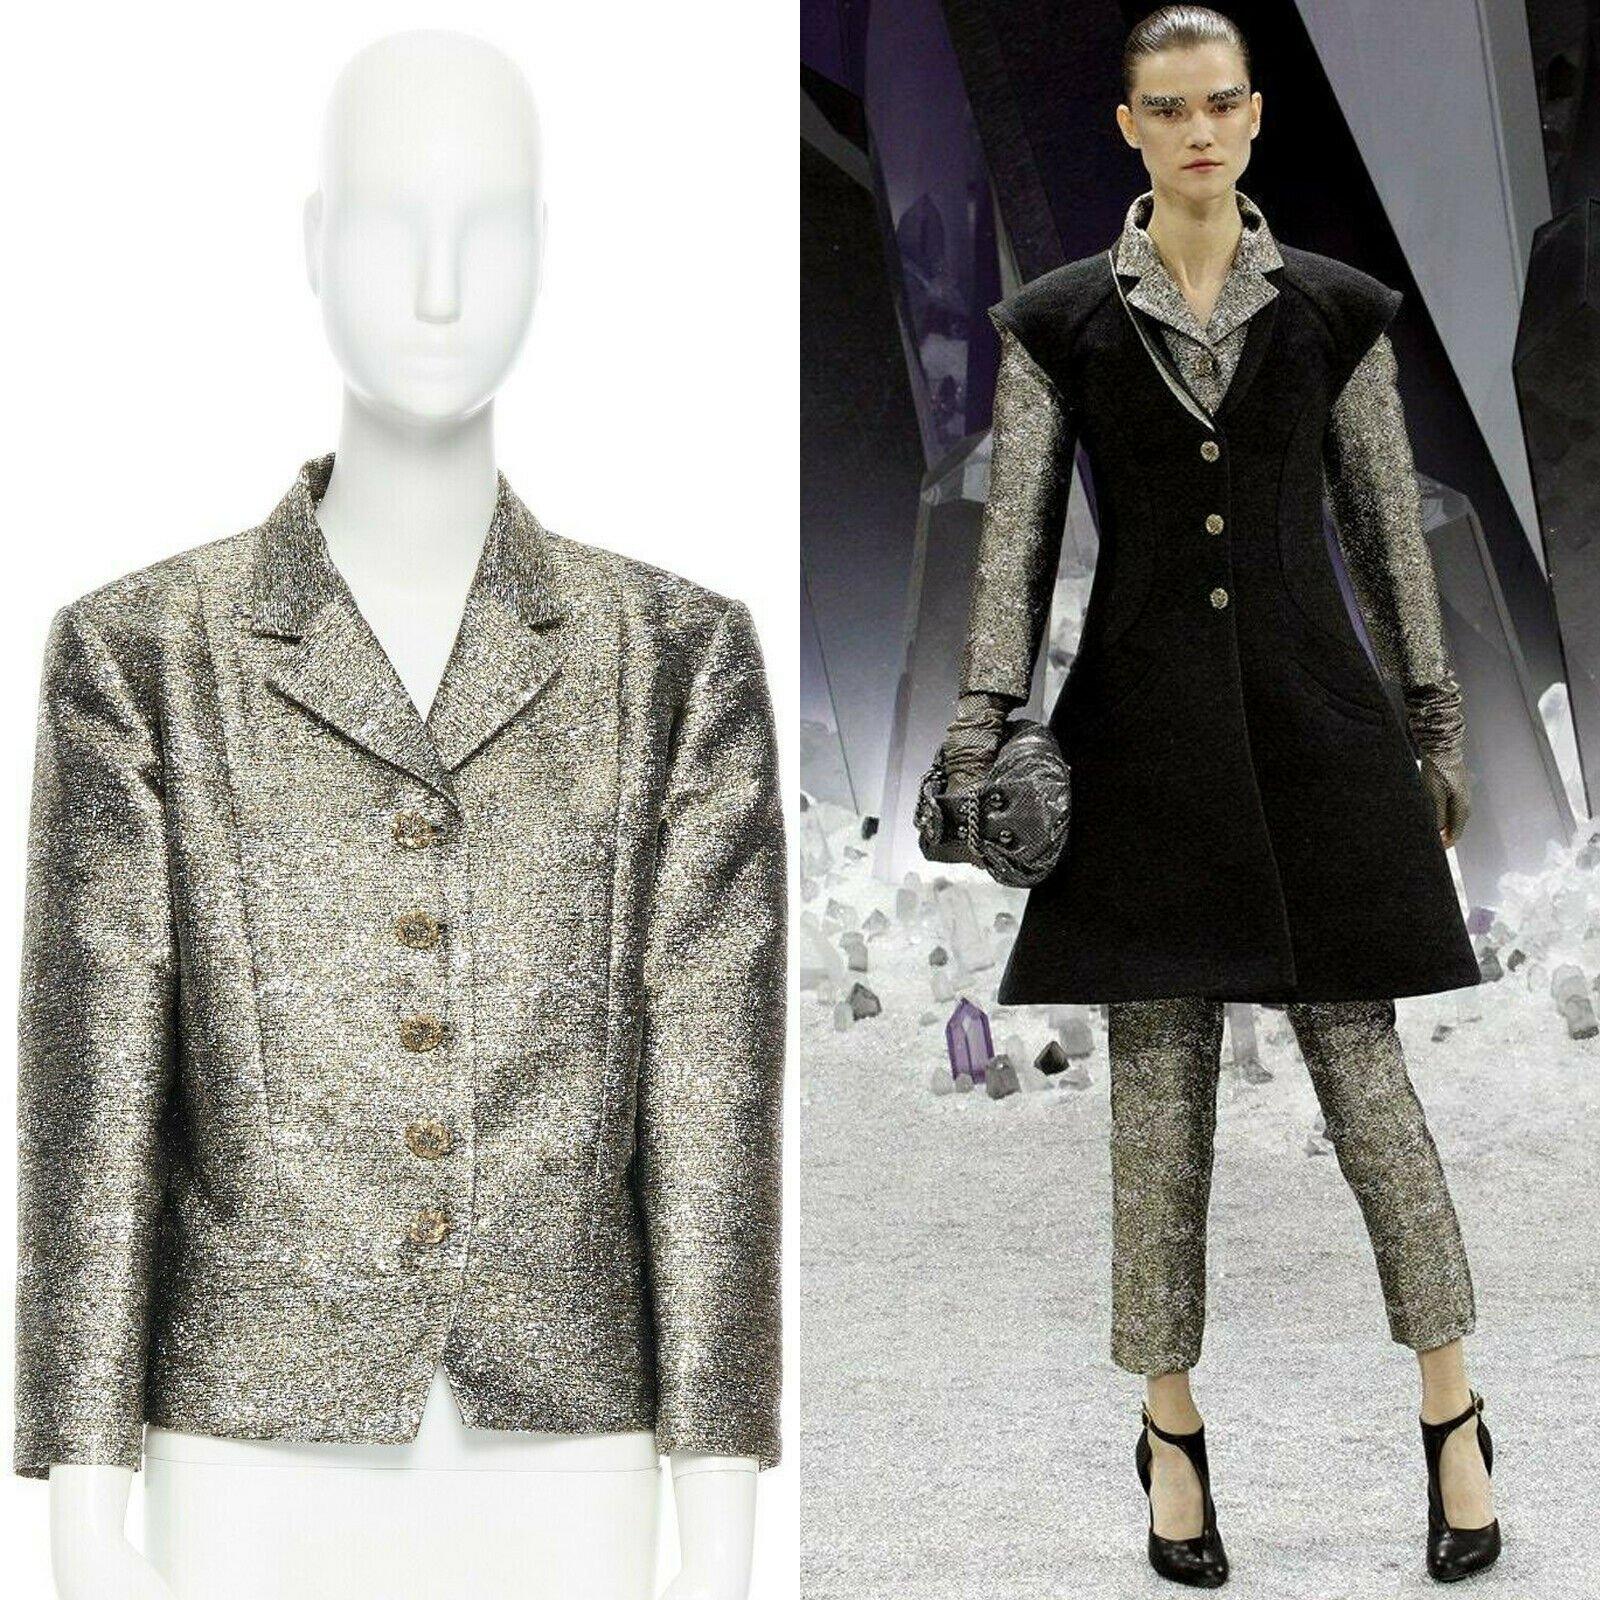 CHANEL 12A metallic silver gold quartz 3/4 sleeves cropped boxy jacket FR50
Brand: Chanel
Designer: Karl Lagerfeld
Collection: Fall Winter 2012 
As seen on: Kasia Struss
Material: Polyester
Color: Gold
Pattern: Solid
Closure: Button
Extra Detail: